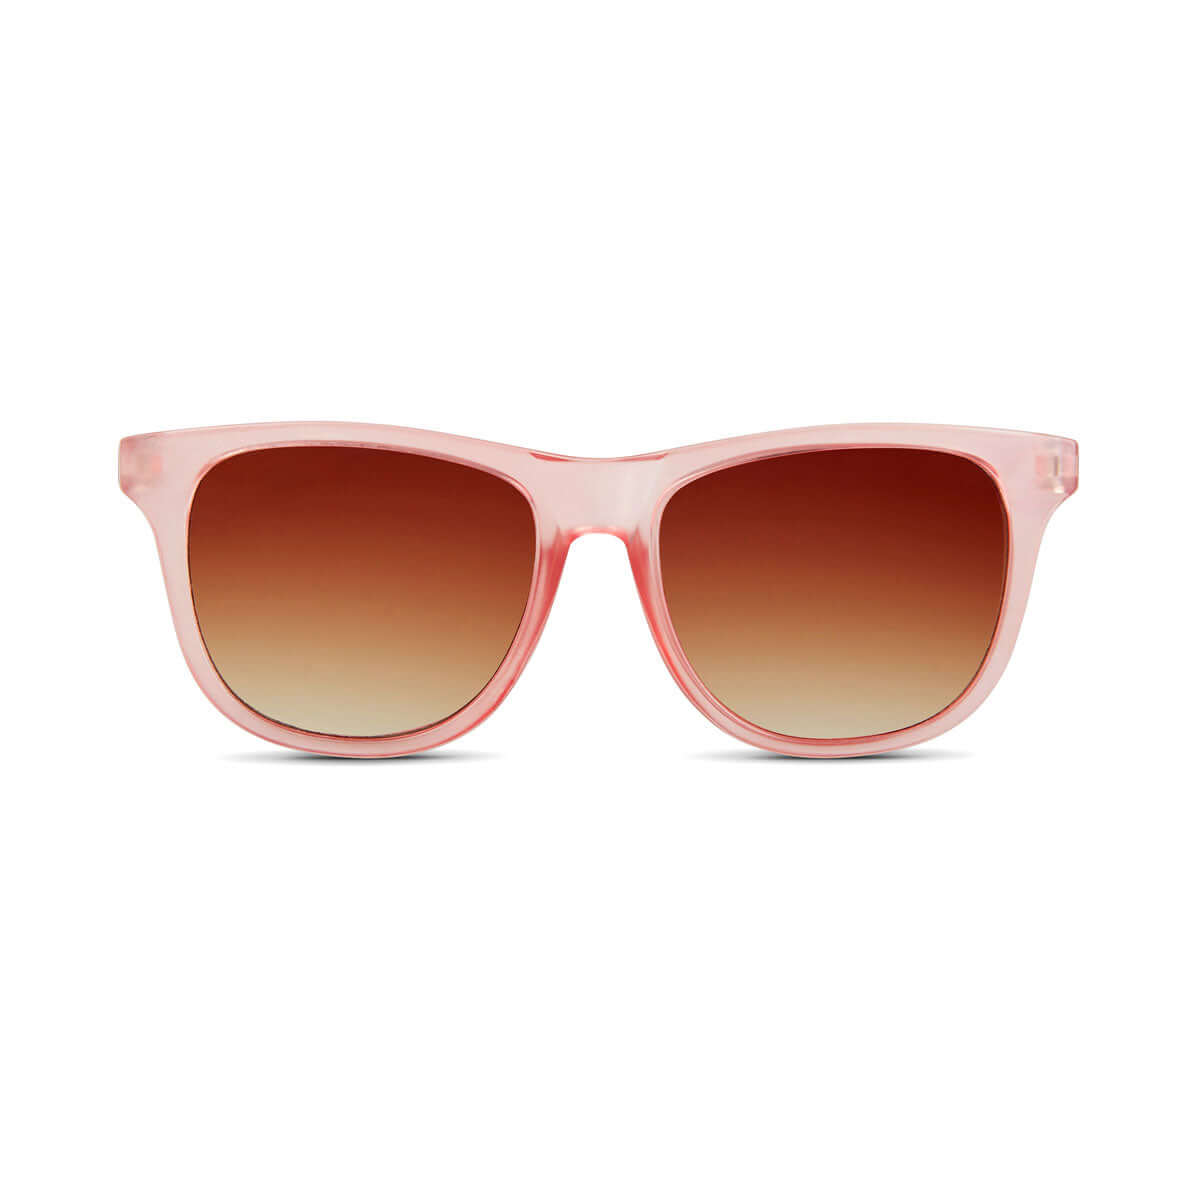 Hipsterkid Baby Sunglasses | Extra Fancy